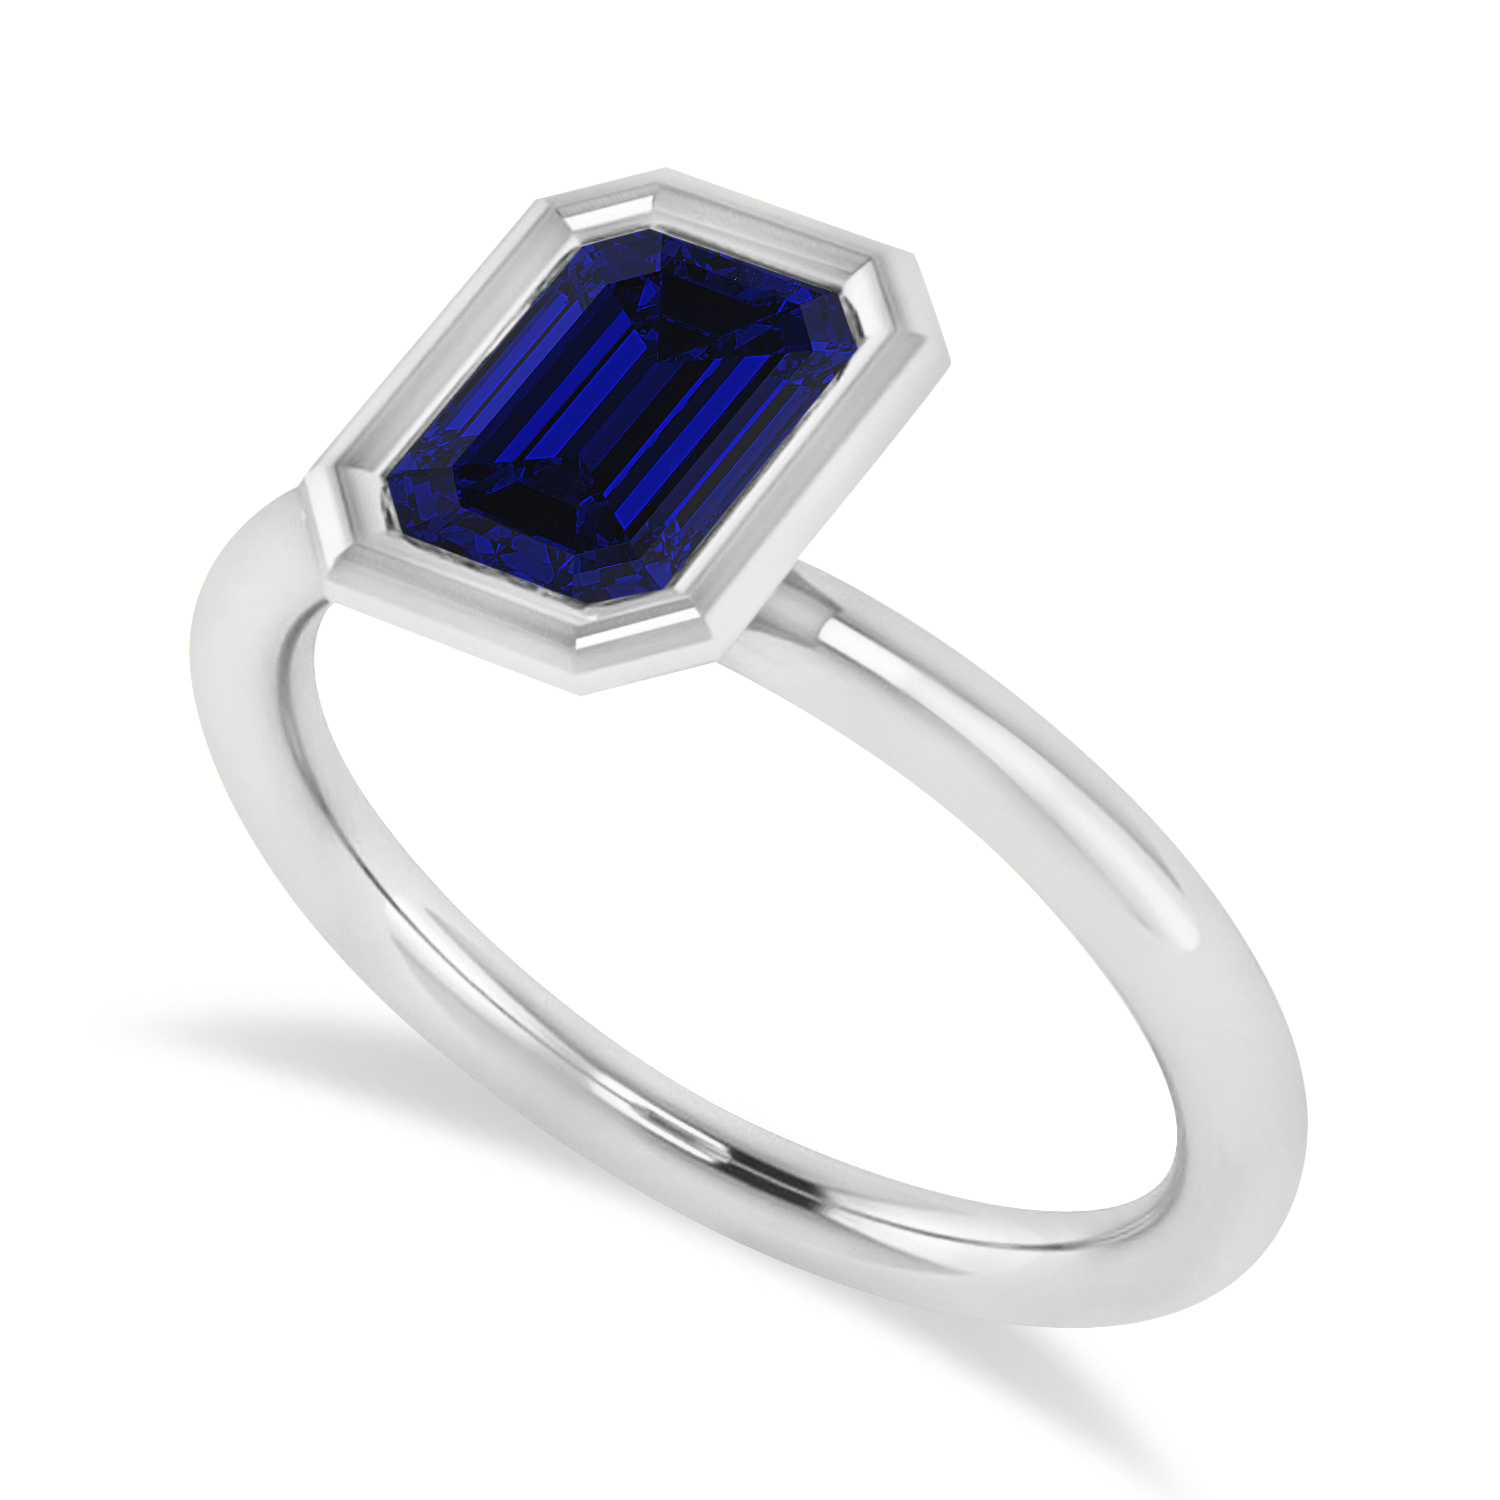 Sapphire Engagement Rings: 30 Engagement Rings For Your Proposal